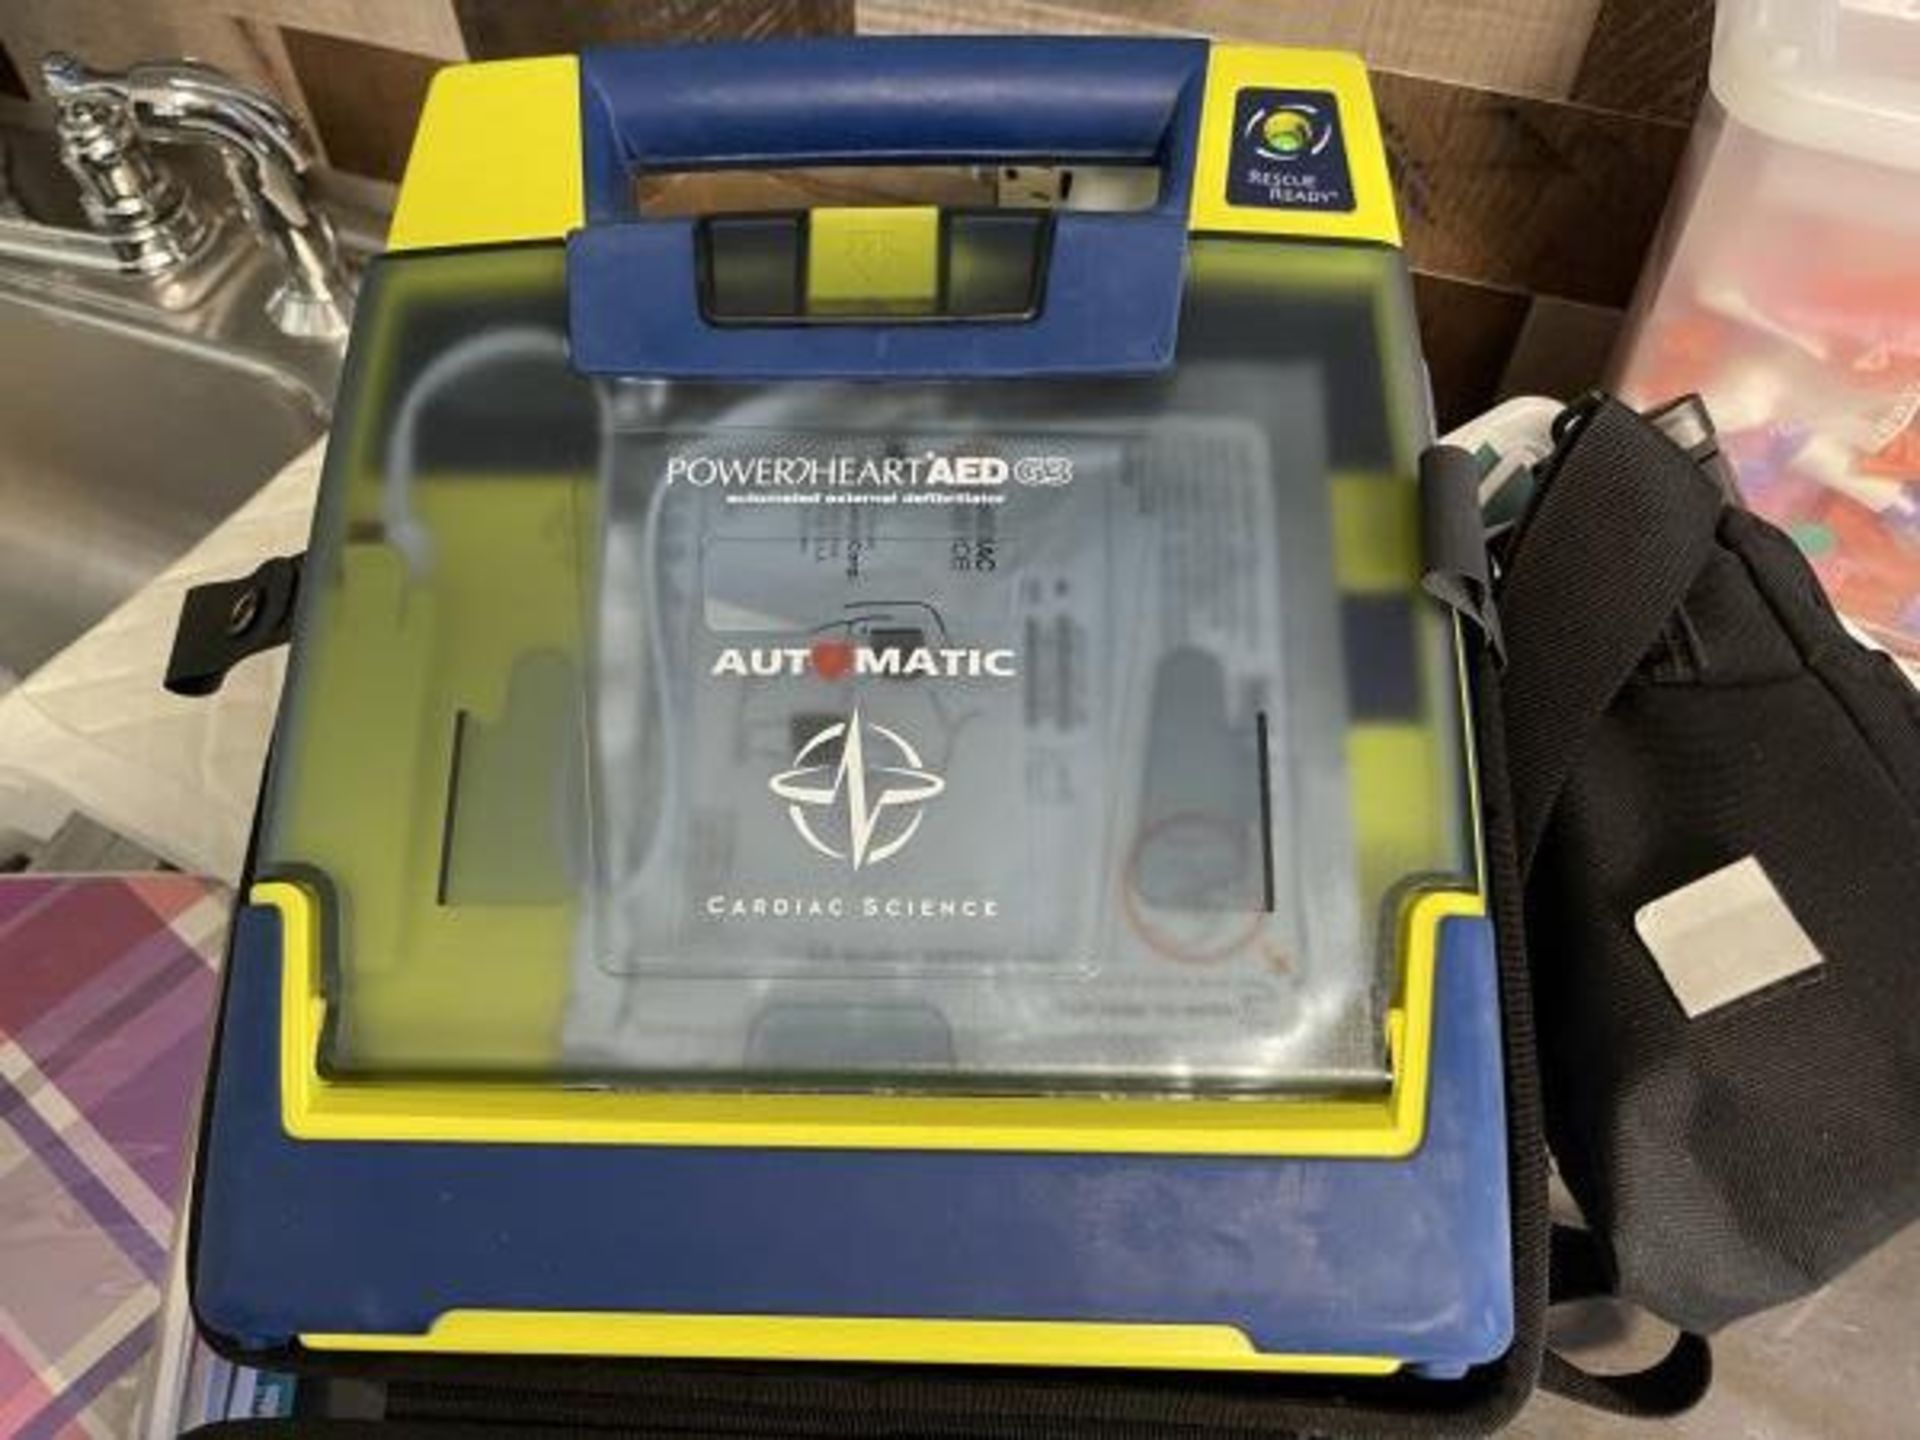 Defibrillator by Cardiac Science, Power Heart AED G3 - Image 2 of 2